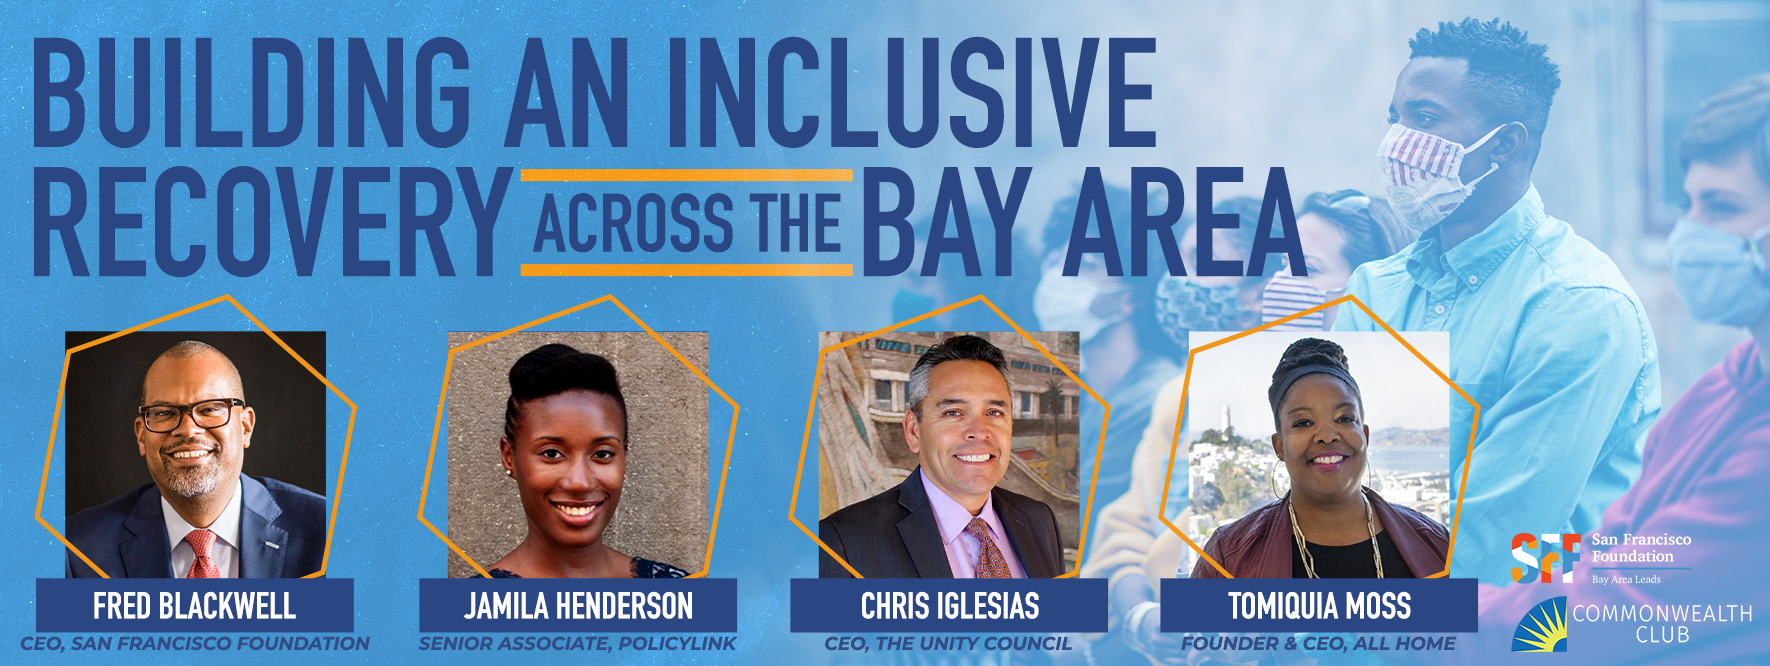 Building an Inclusive Recovery across the Bay Area